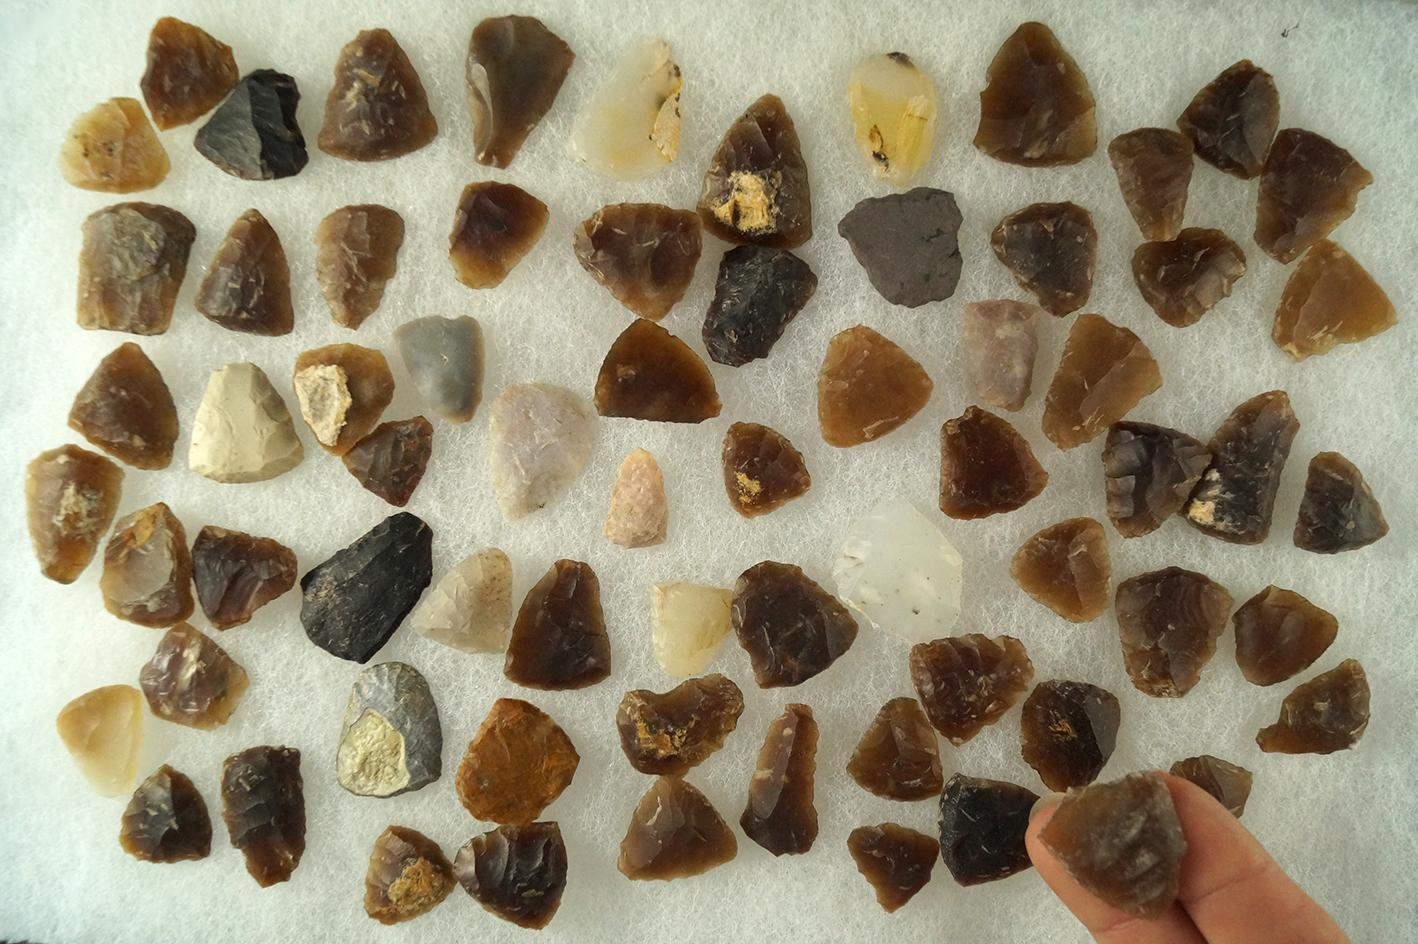 Large group of thumb scrapers, most are knife River Flint found in the Dakotas. Largest is 1 1/8".